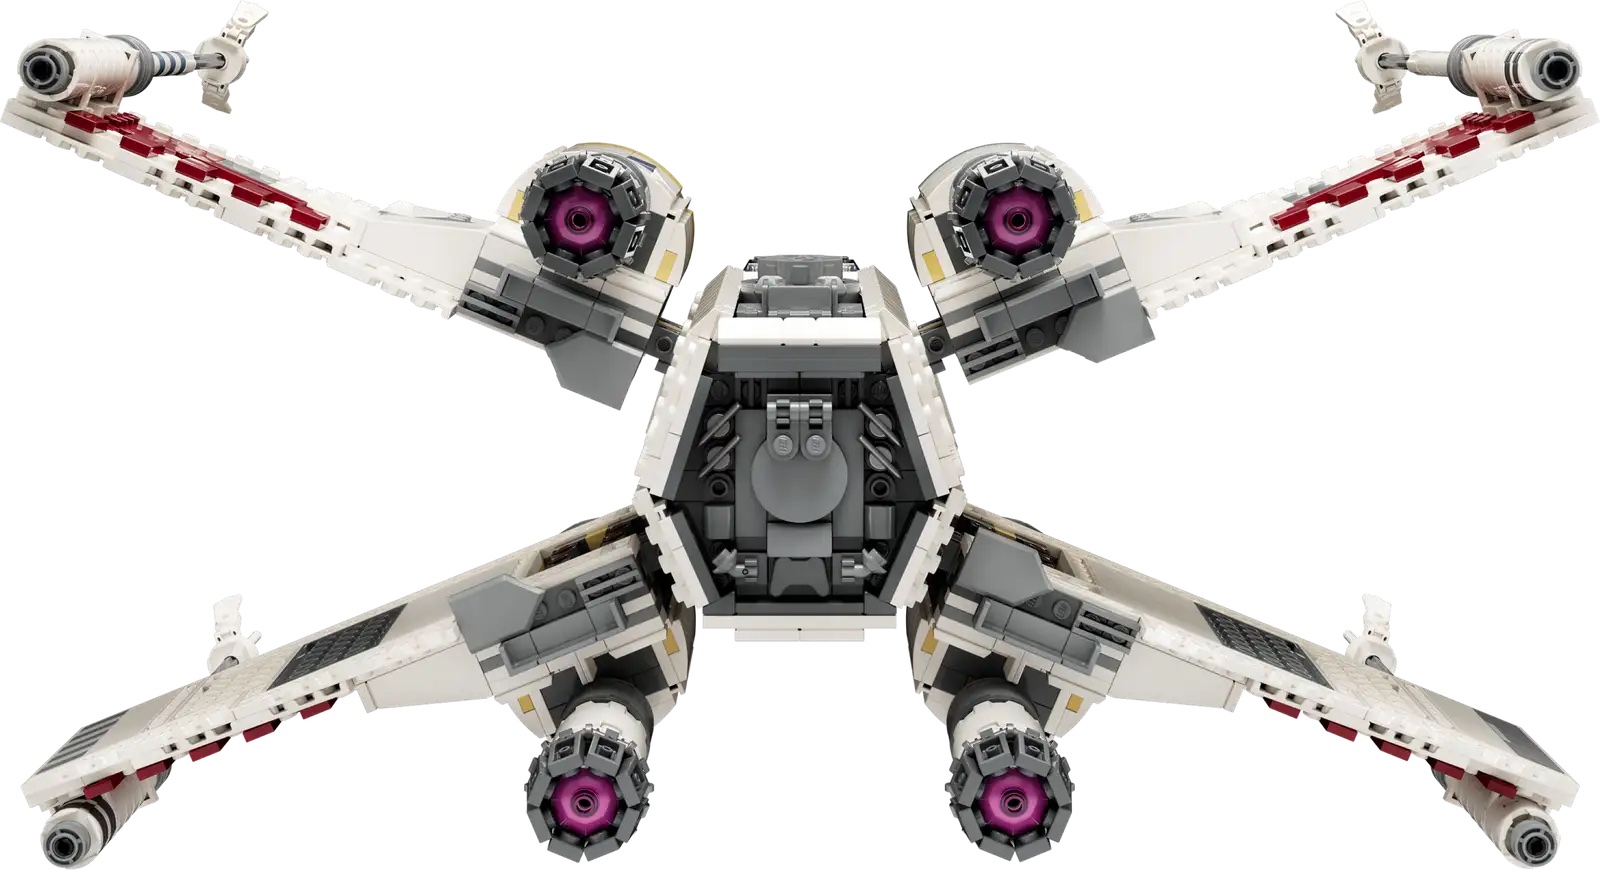 The back of the LEGO X-Wing Starfighter 